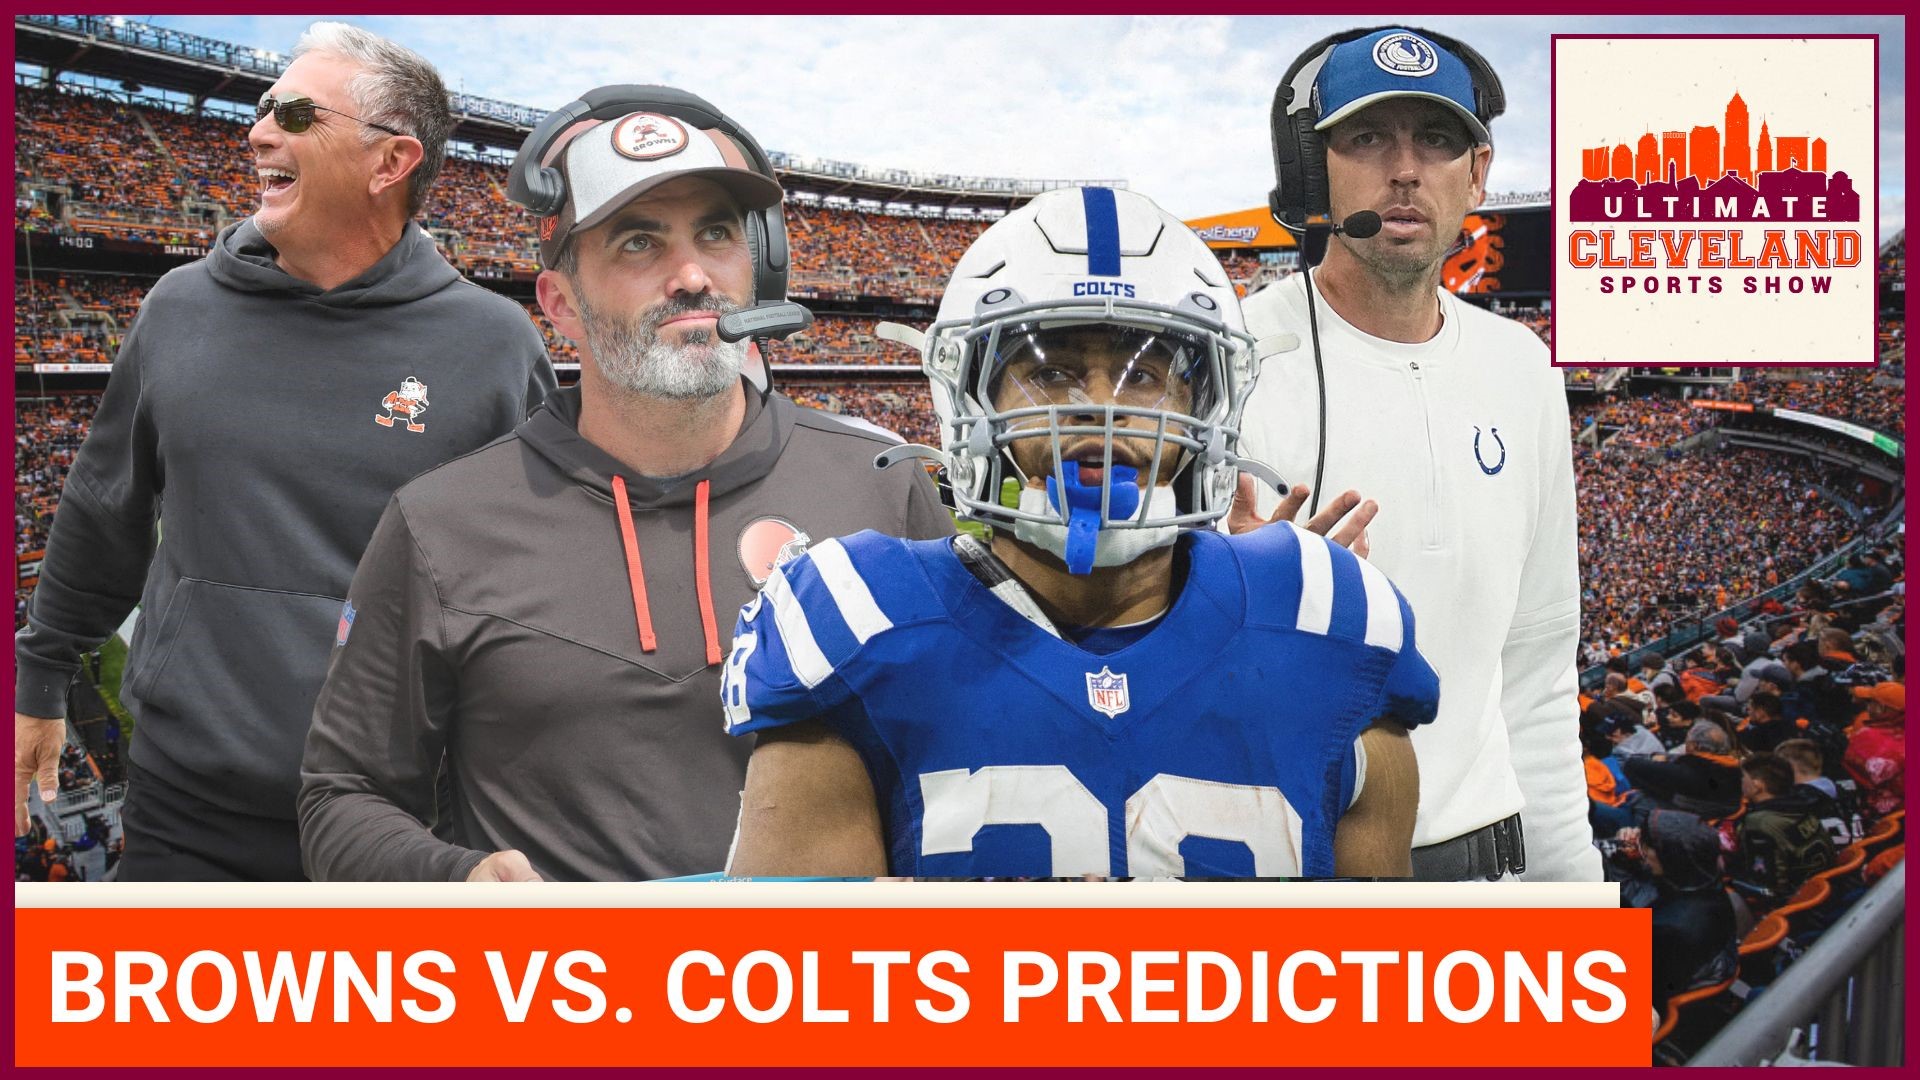 See the UCCS panel's prewritten headlines ahead of Browns vs. Colts.